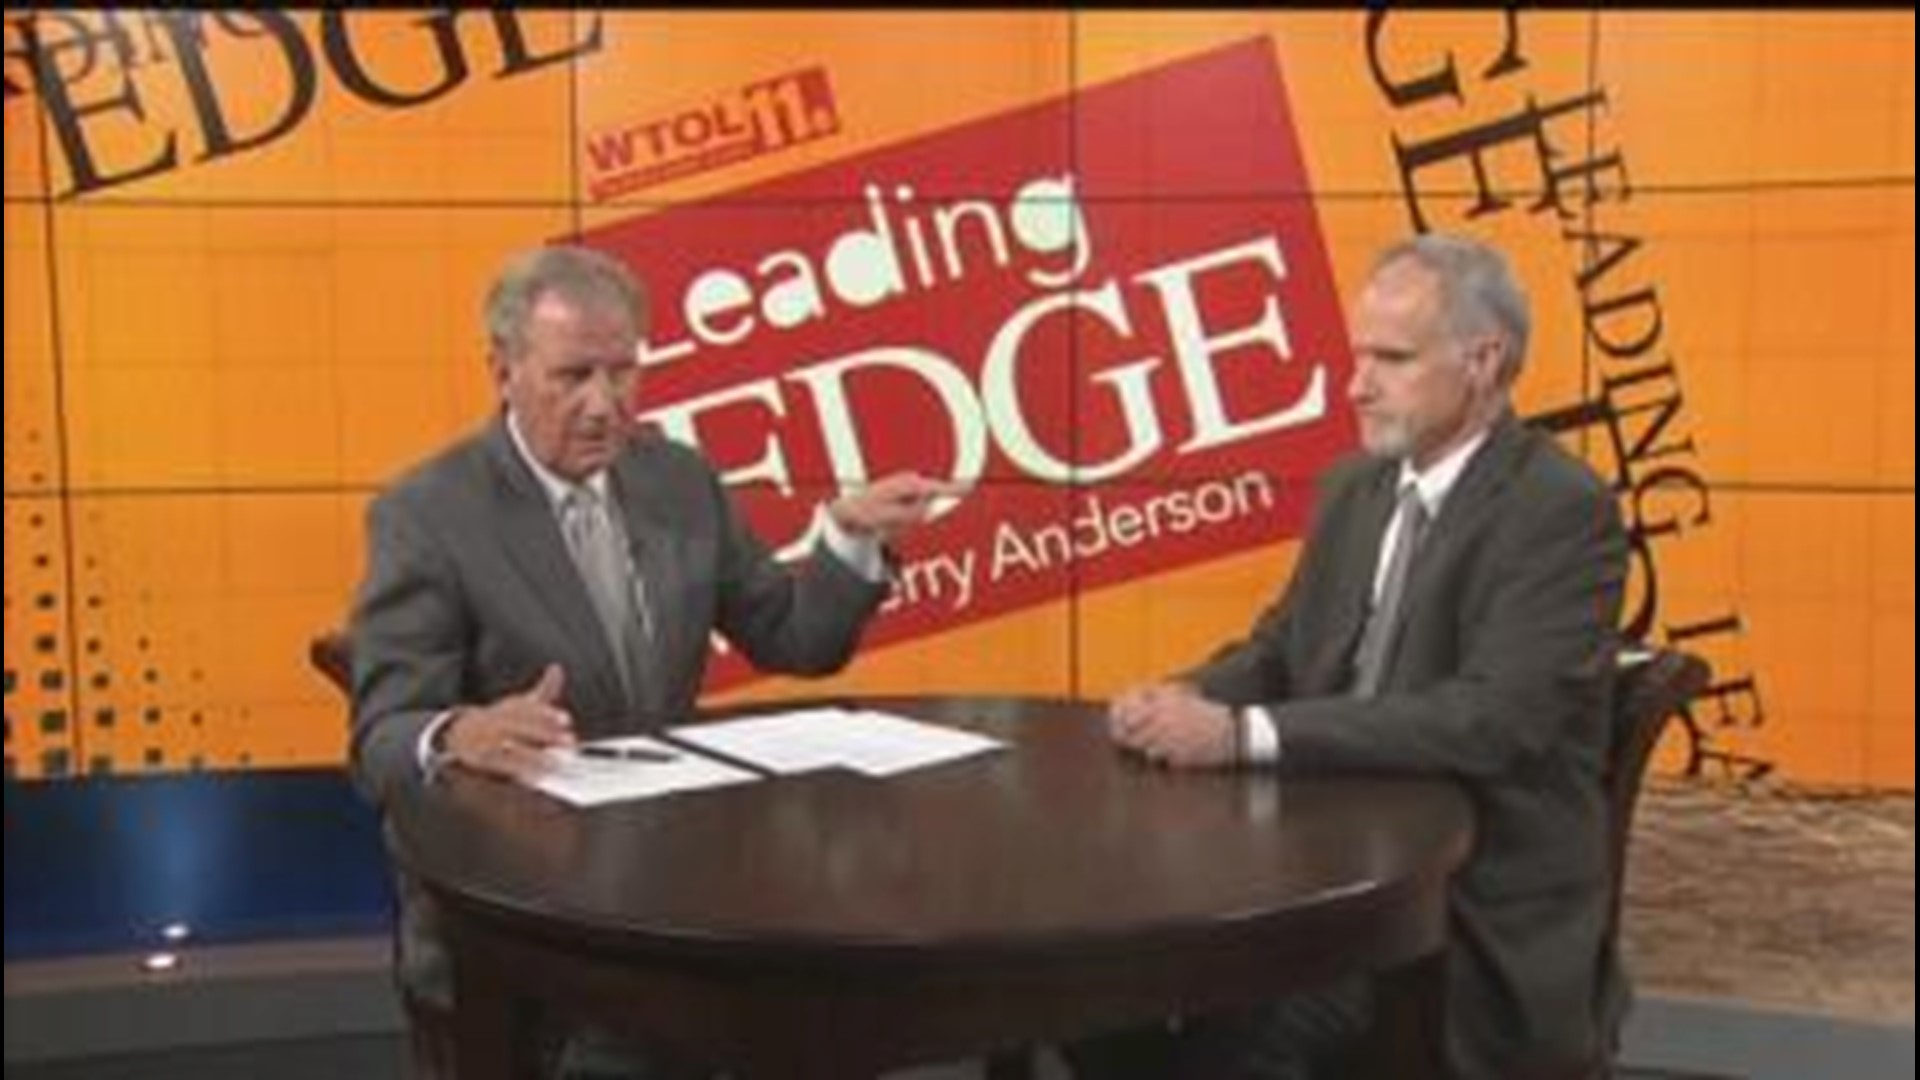 Sept. 3: Leading Edge with Jerry Anderson - Segment 3